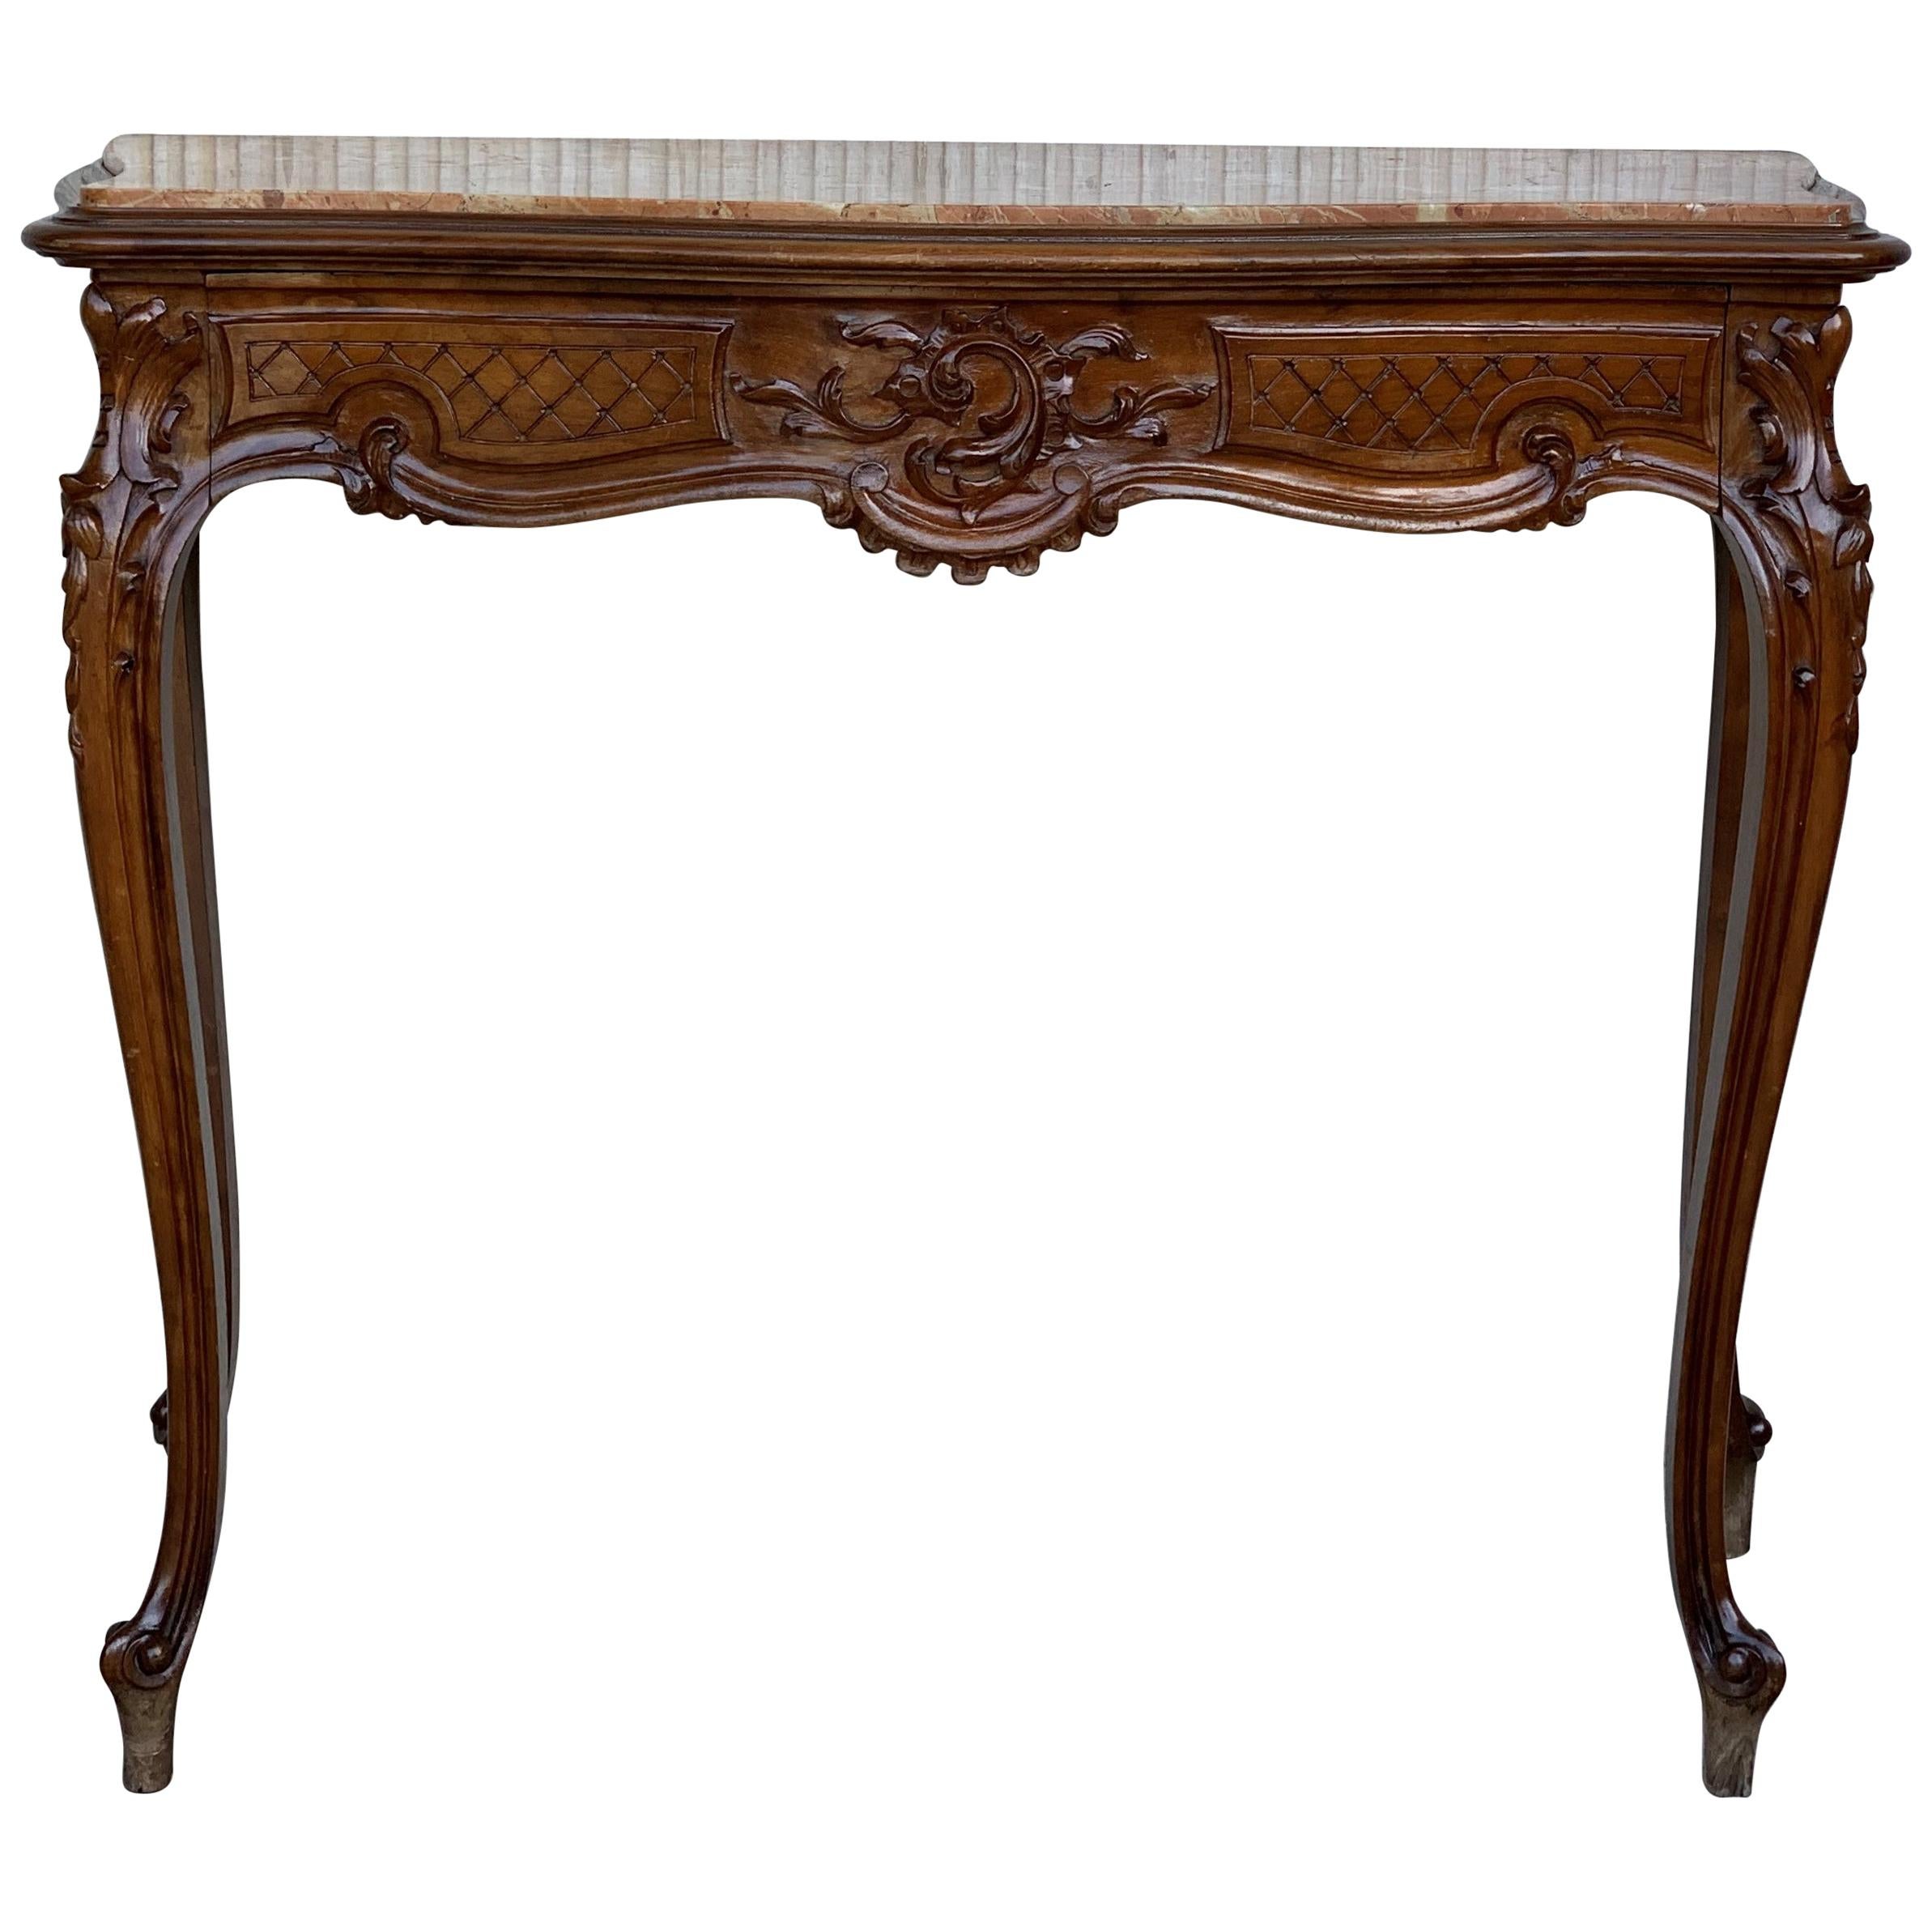 20th French Century Marble Top Walnut Console Table with Drawer